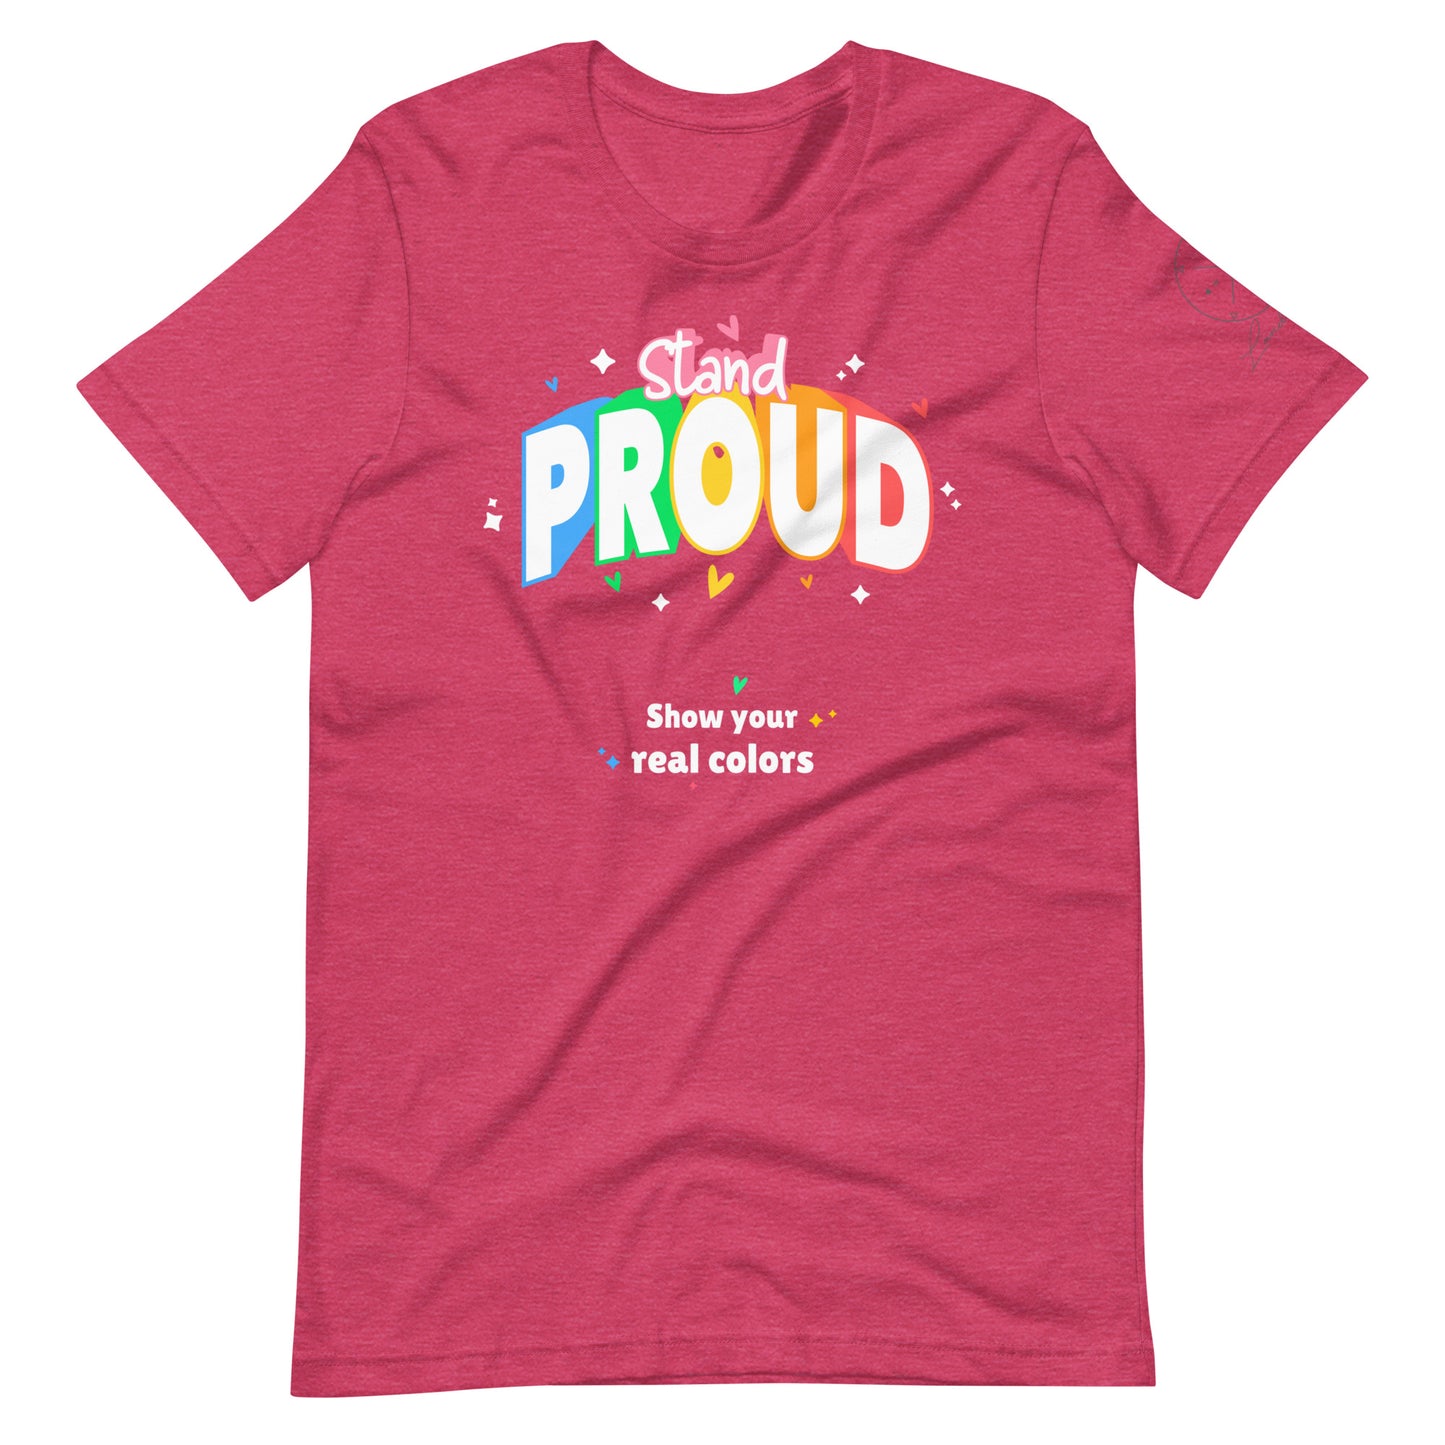 Stand Proud! "Show Your True Colors" Pride Tee